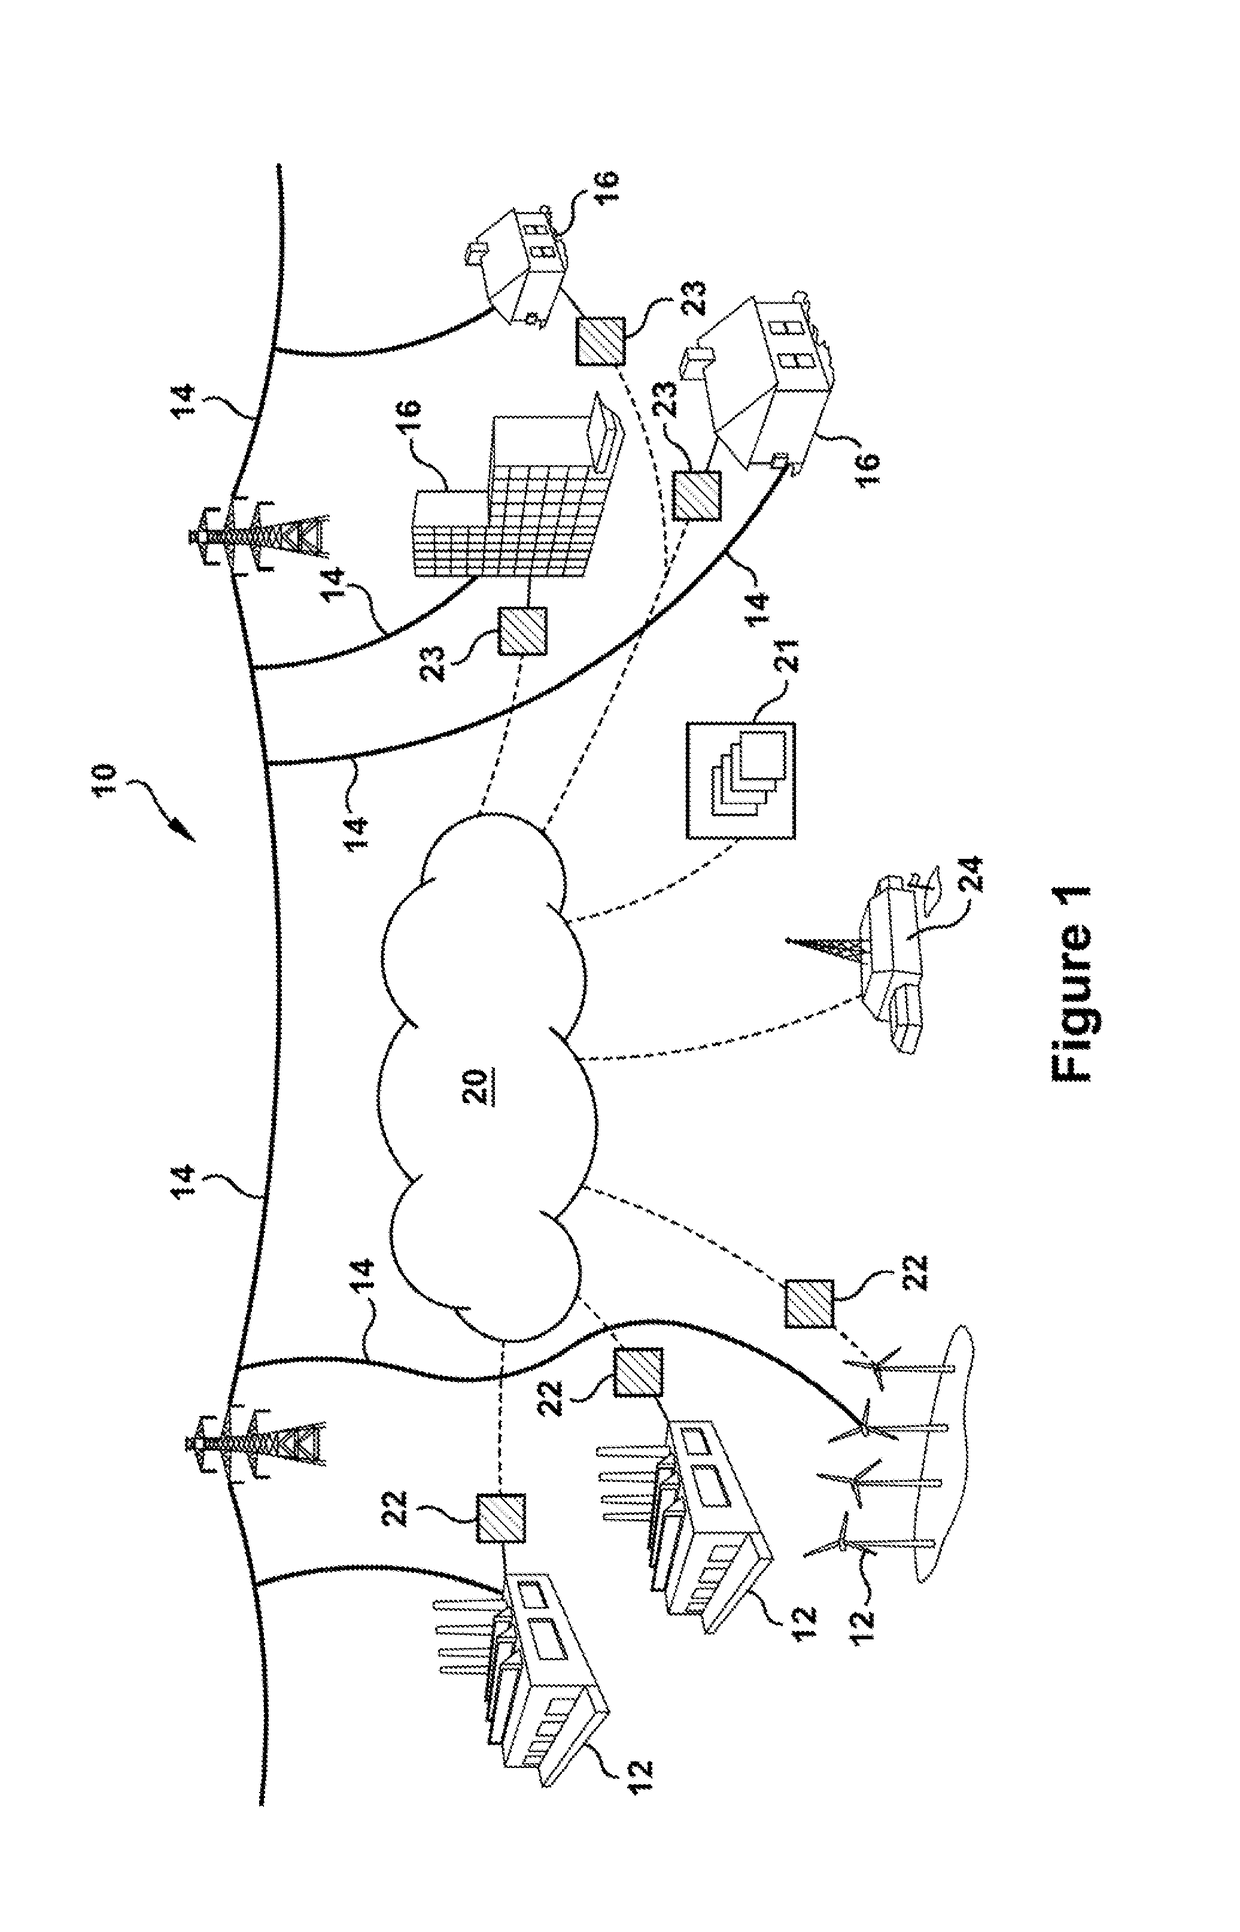 Methods and systems for controlling generating units and power plants for improved performance